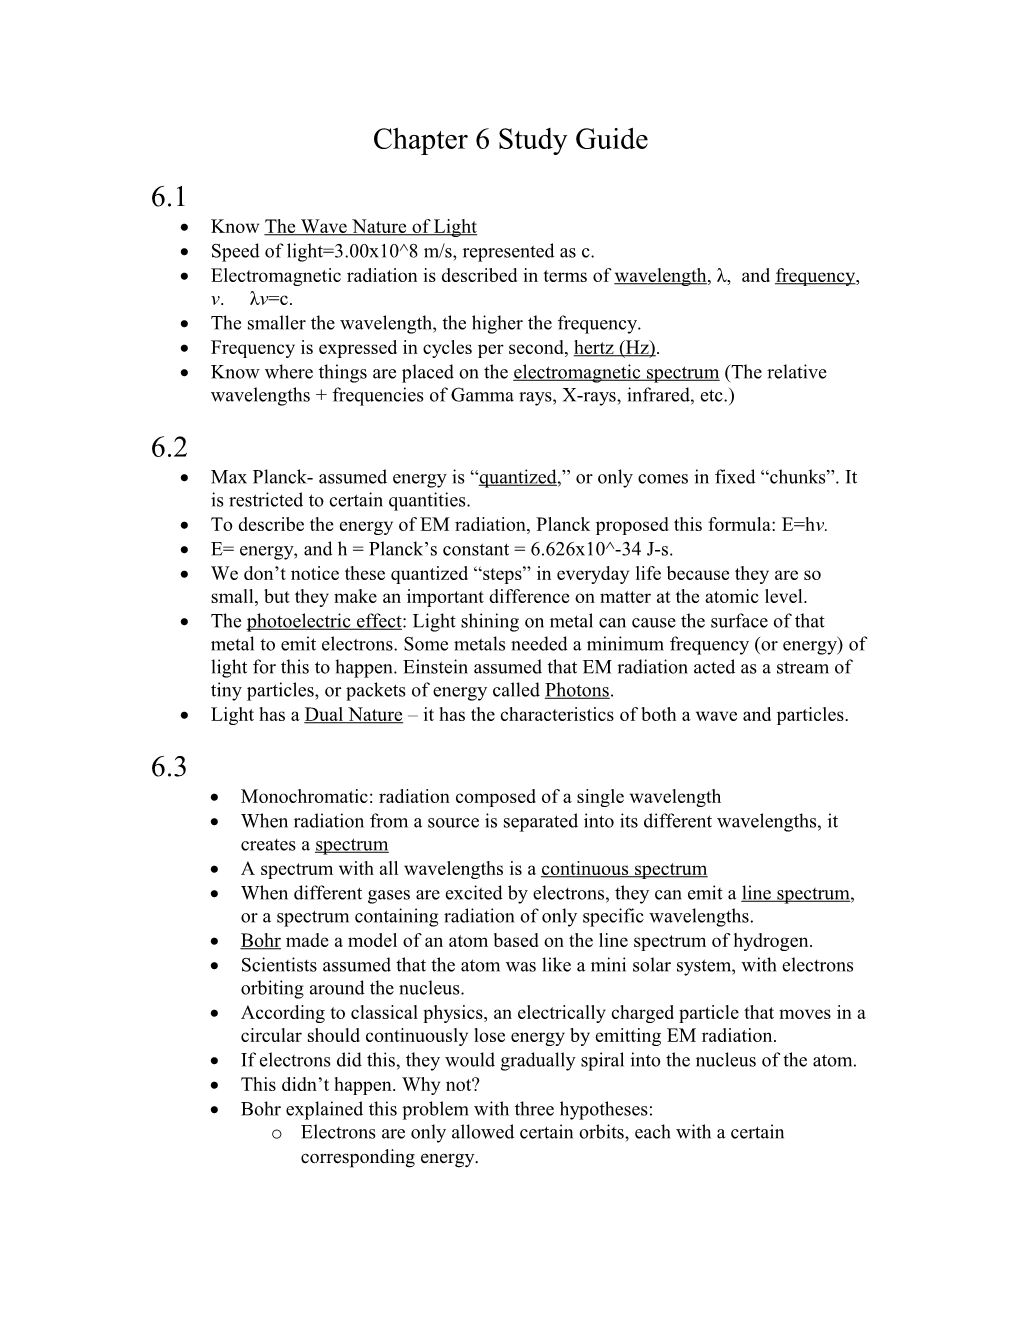 Chapter 6 Study Guide s3